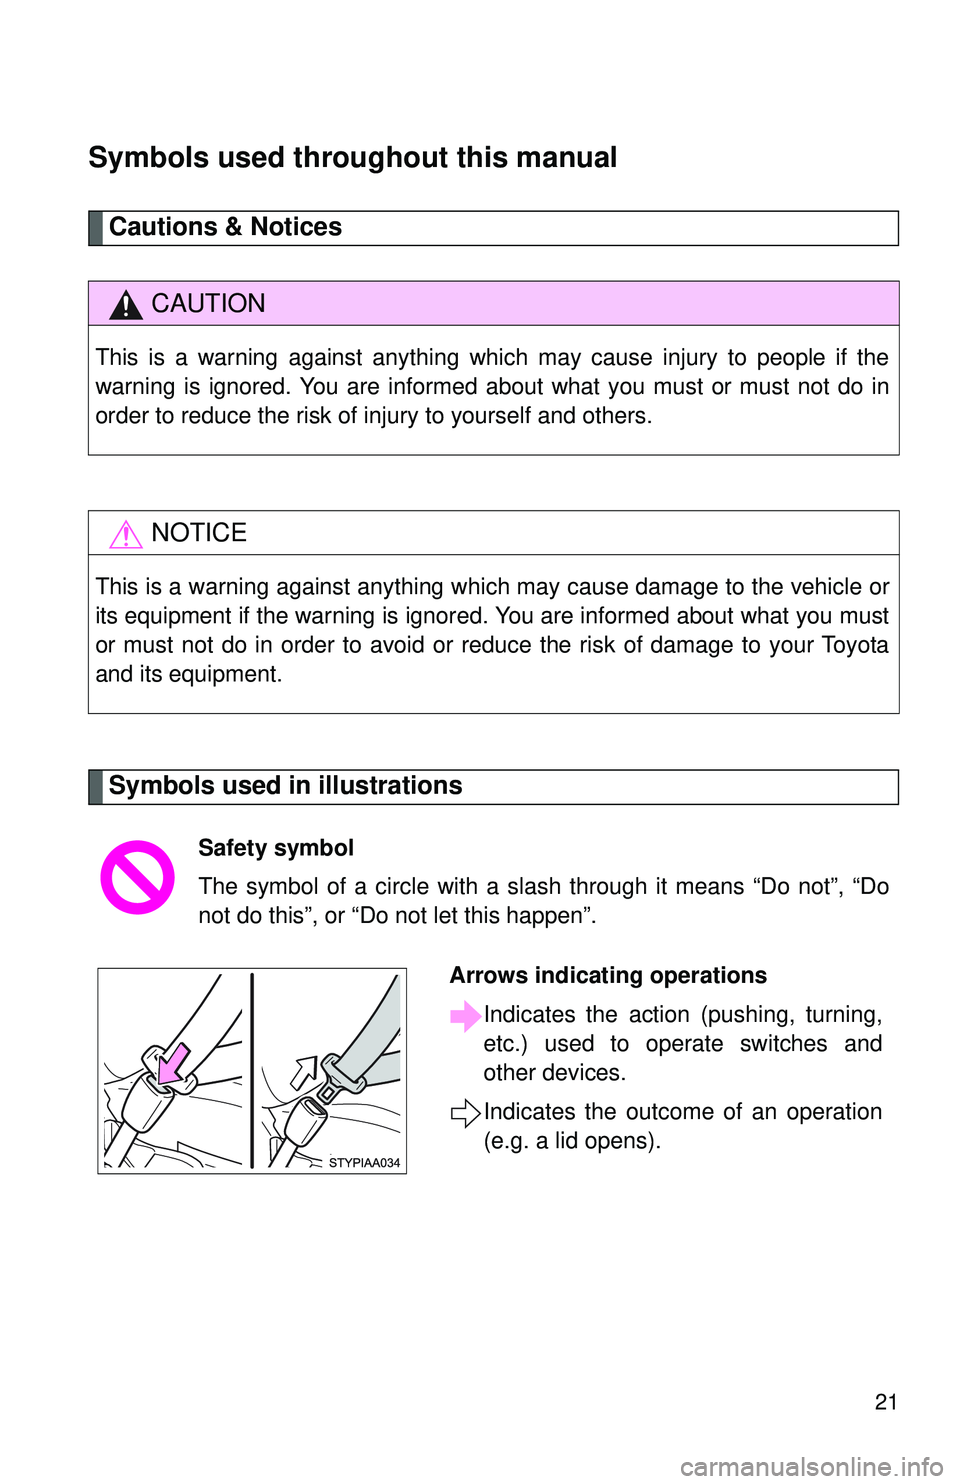 TOYOTA YARIS SEDAN 2011  Owners Manual 21
Symbols used throughout this manual
Cautions & Notices 
Symbols used in illustrations
CAUTION
This is a warning against anything which may cause injury to people if the
warning is ignored. You are 